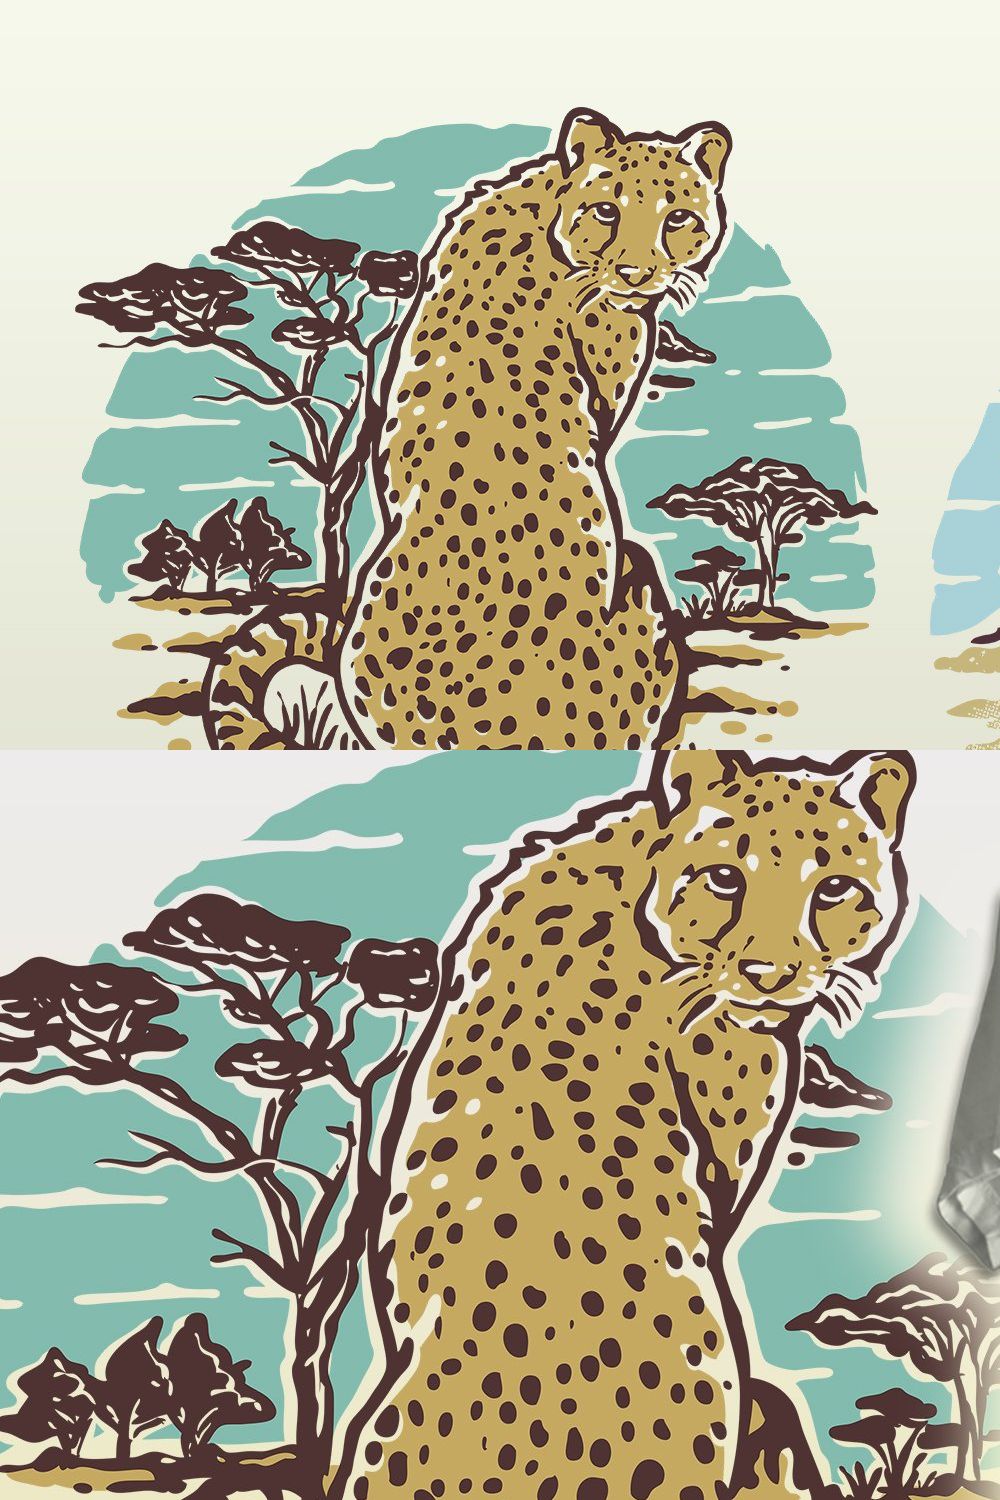 The Wildlife Cheetah & Lion pinterest preview image.